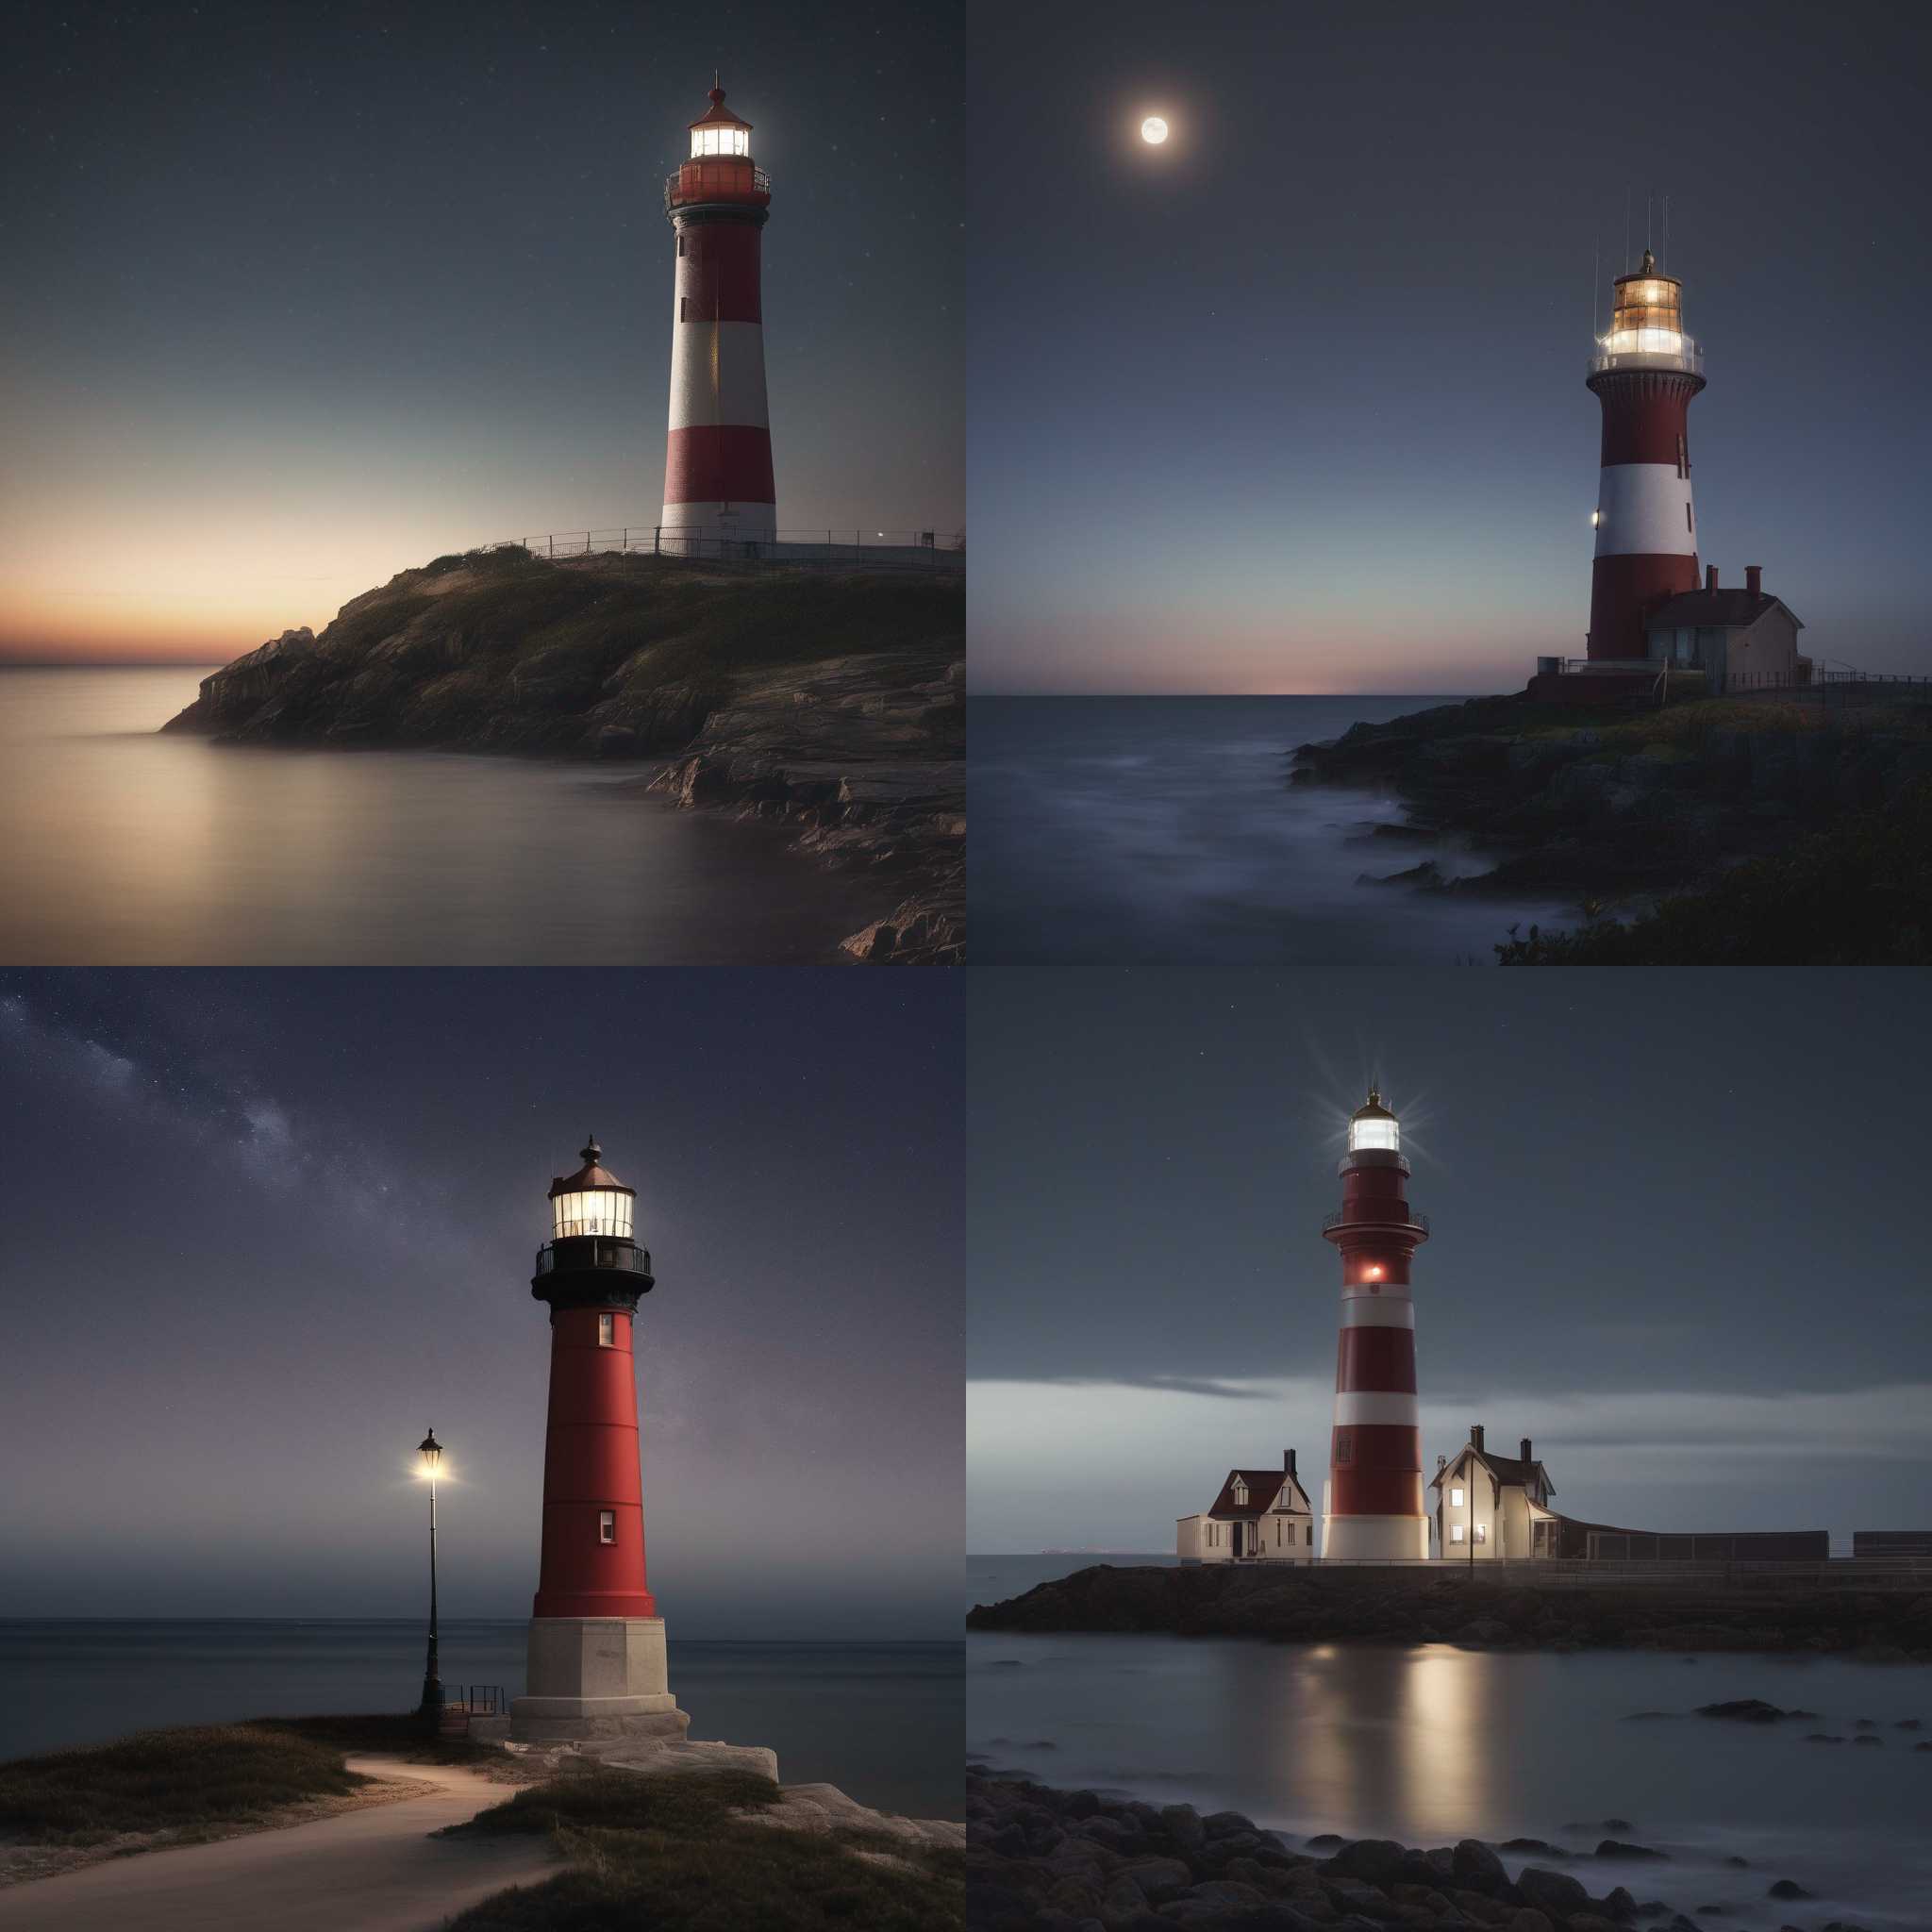 A lighthouse during nighttime